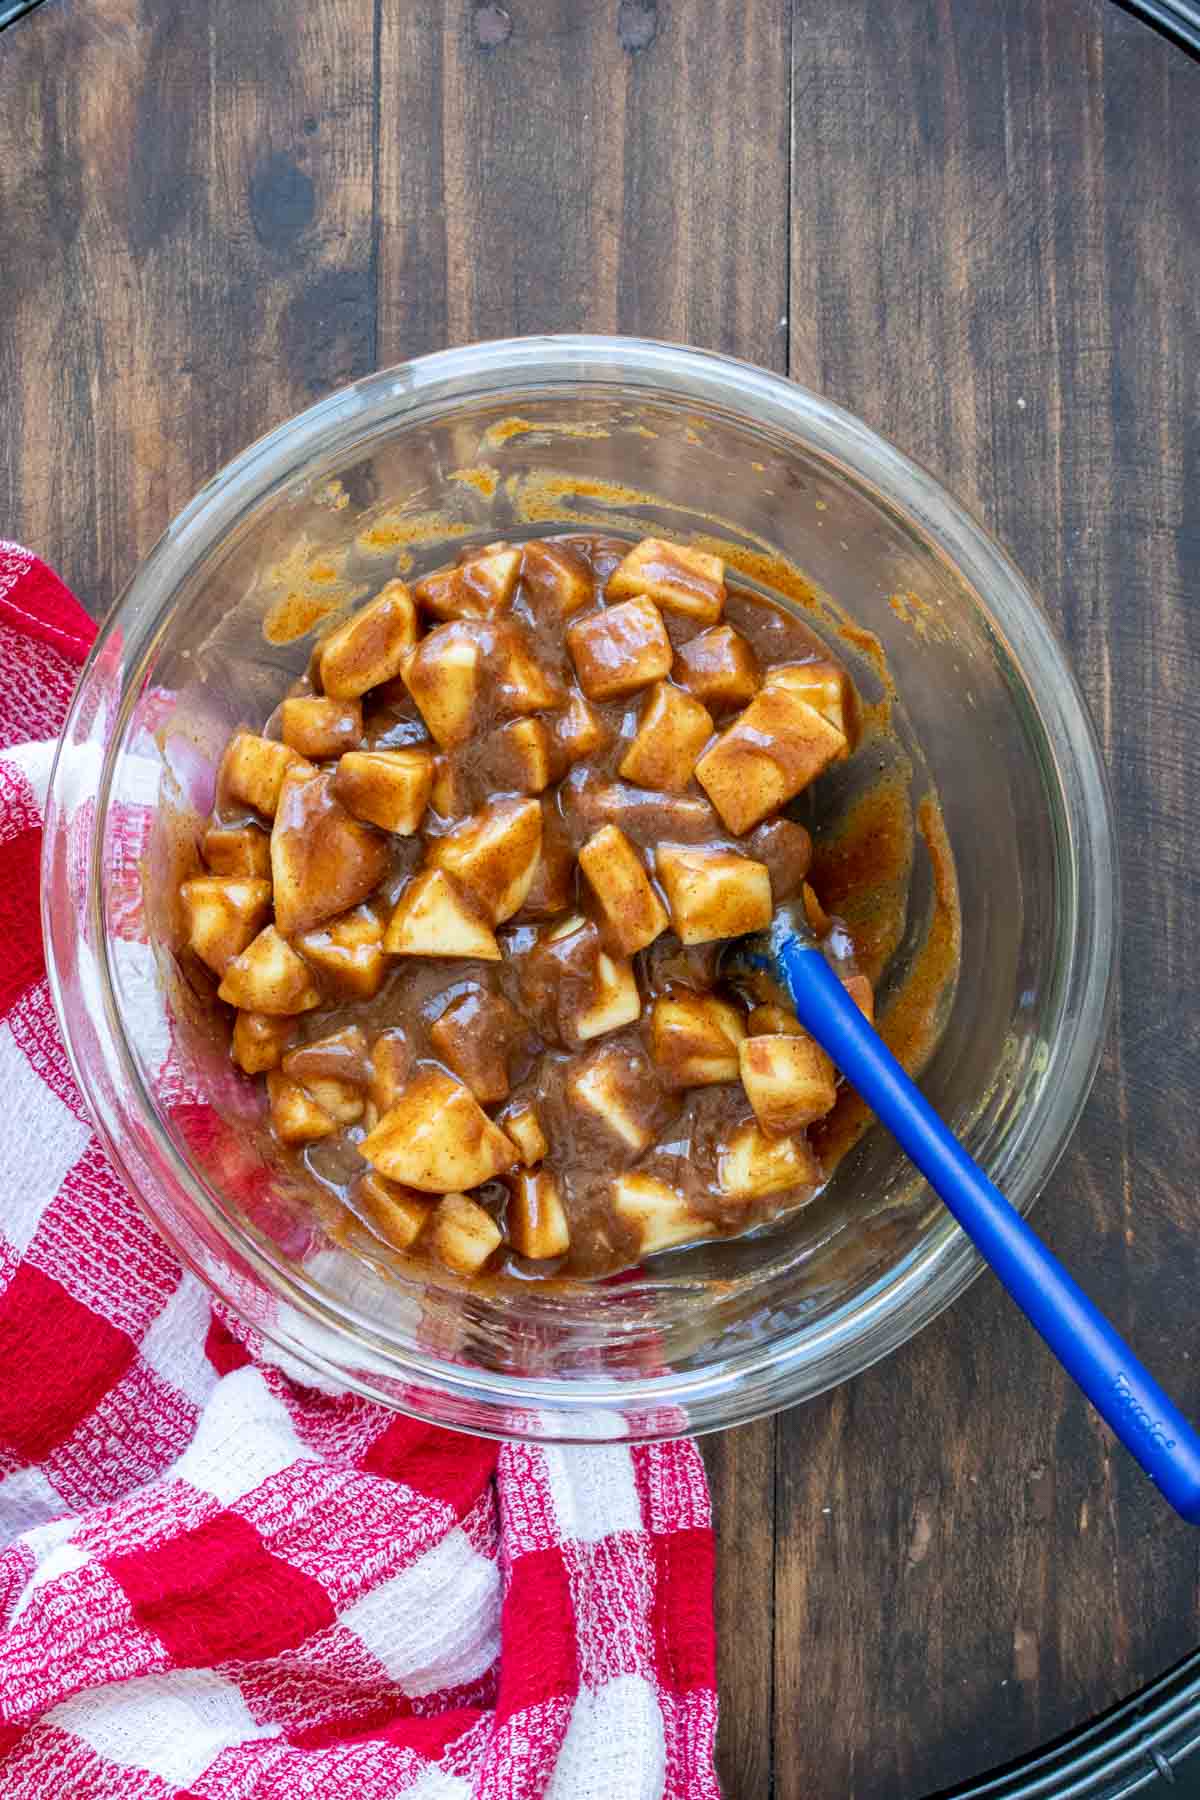 Blue spatula mixing chopped apples covered in a caramel sauce